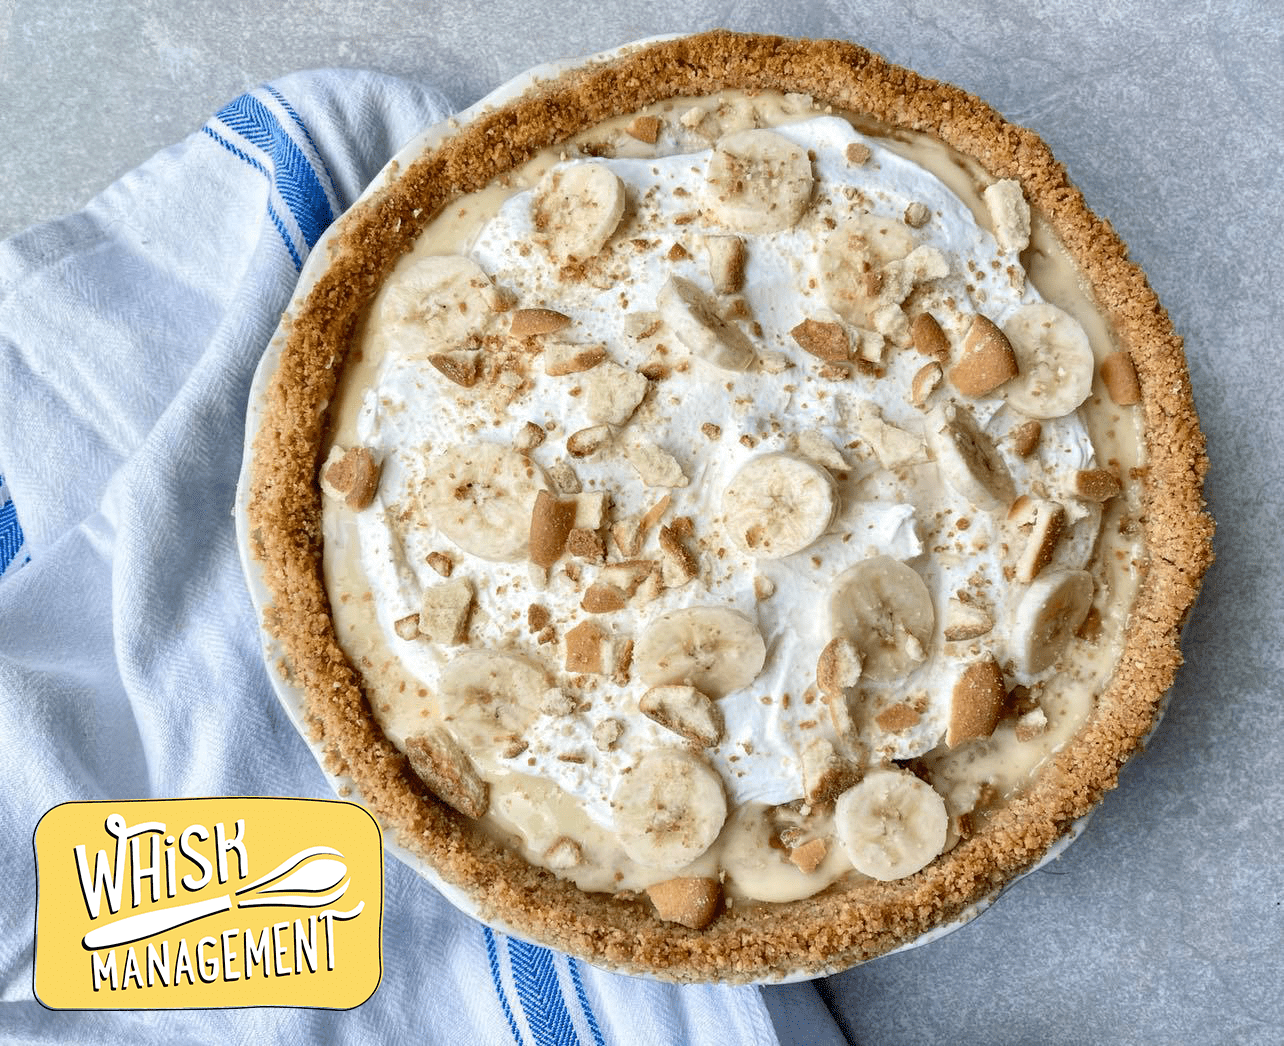 Peanut Butter and Banana Pudding Pie